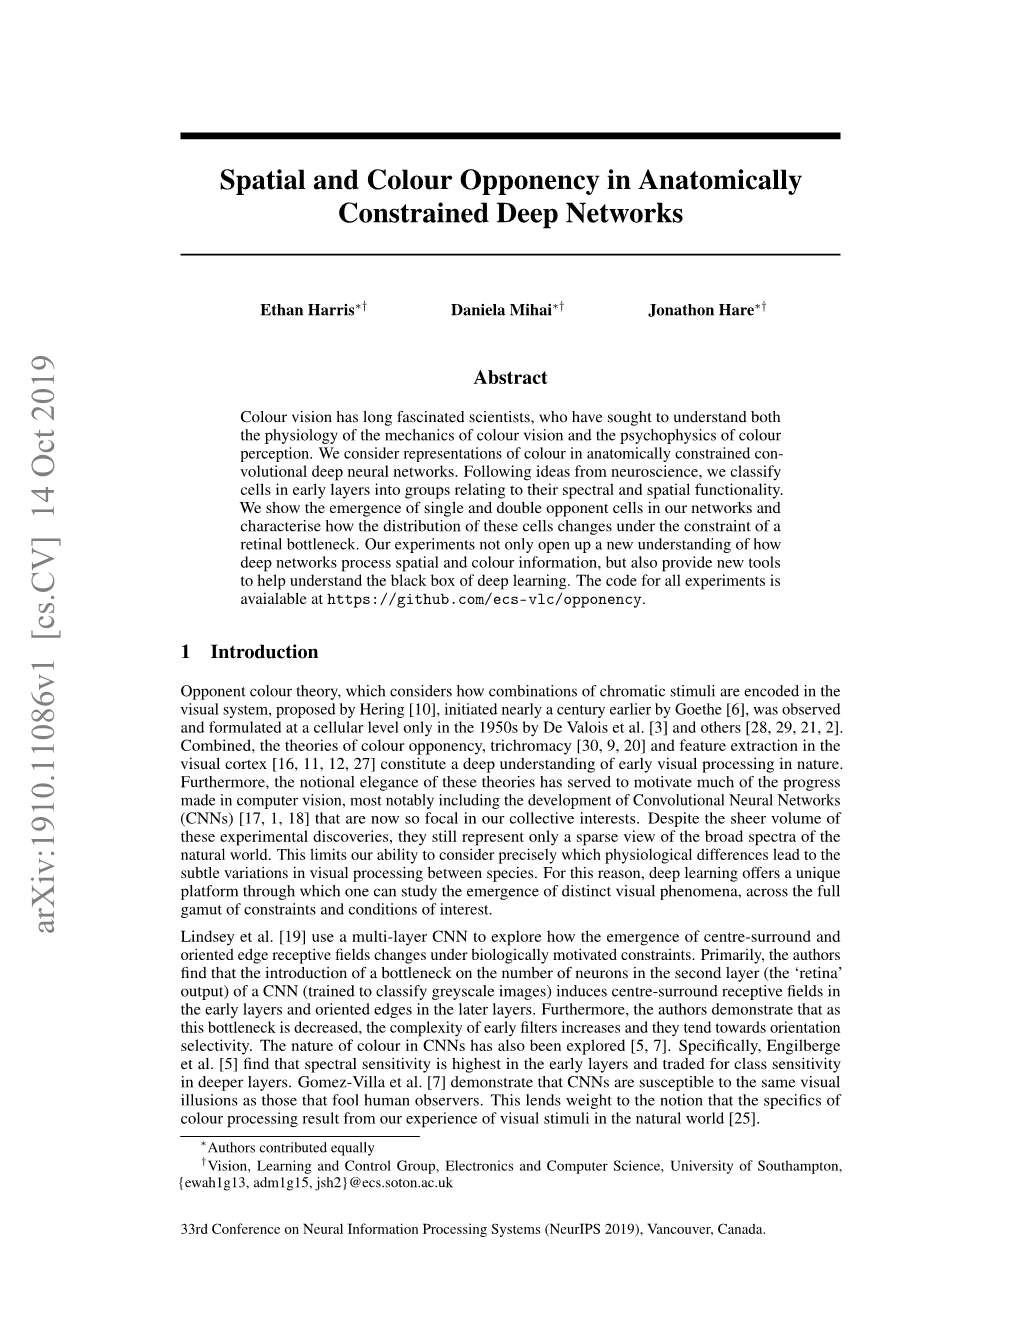 Spatial and Colour Opponency in Anatomically Constrained Deep Networks